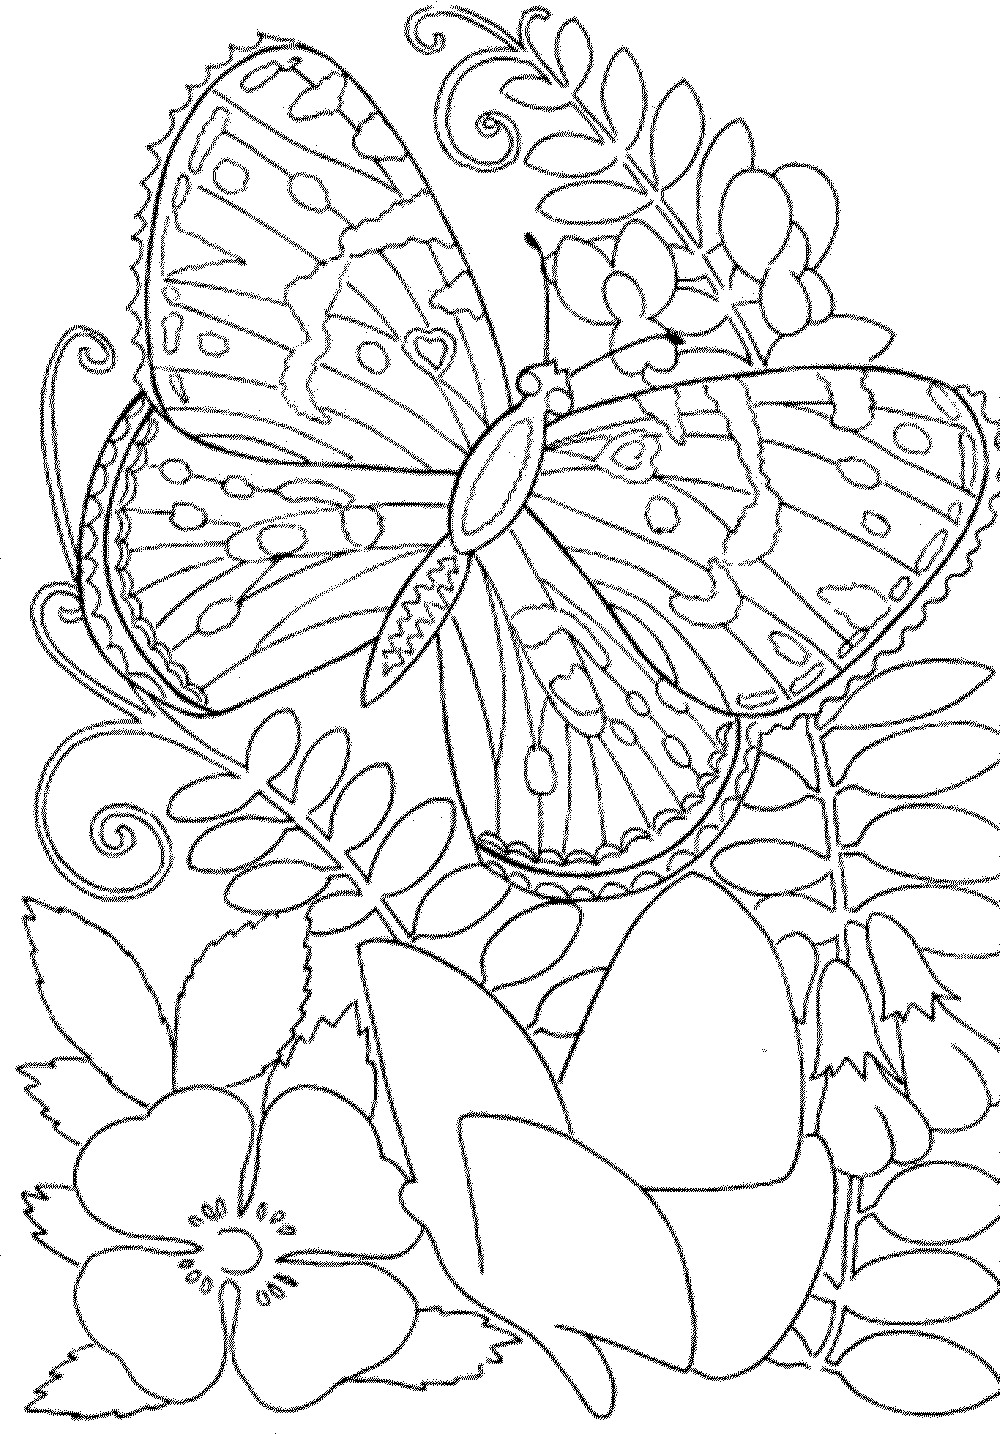 Printable Adult Coloring Pages Free
 Free Owl Adult Coloring Pages To Print Coloring Home